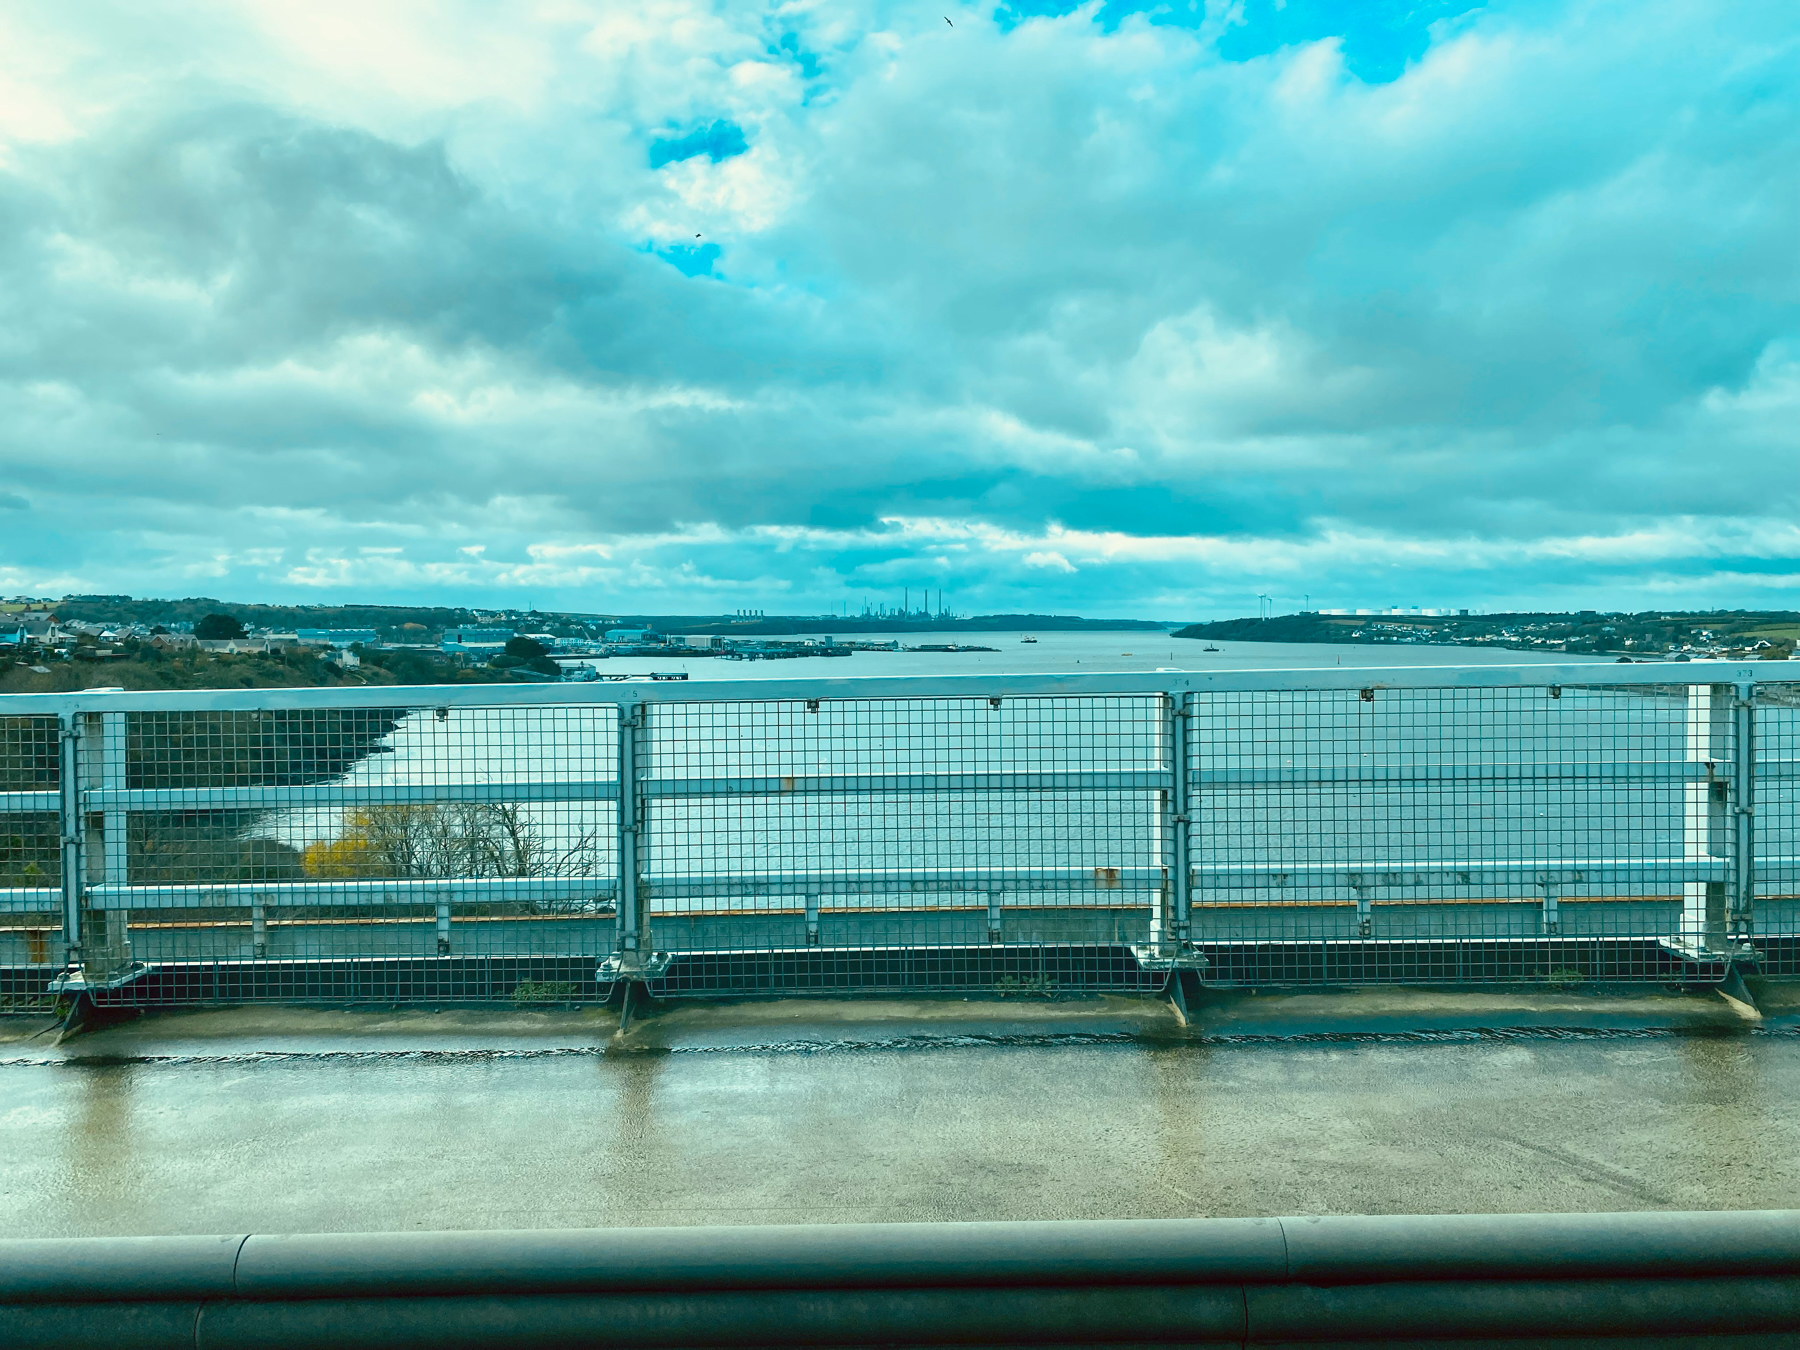 View from a bridge over wide river, white grid fence in foreground, cloudy sky